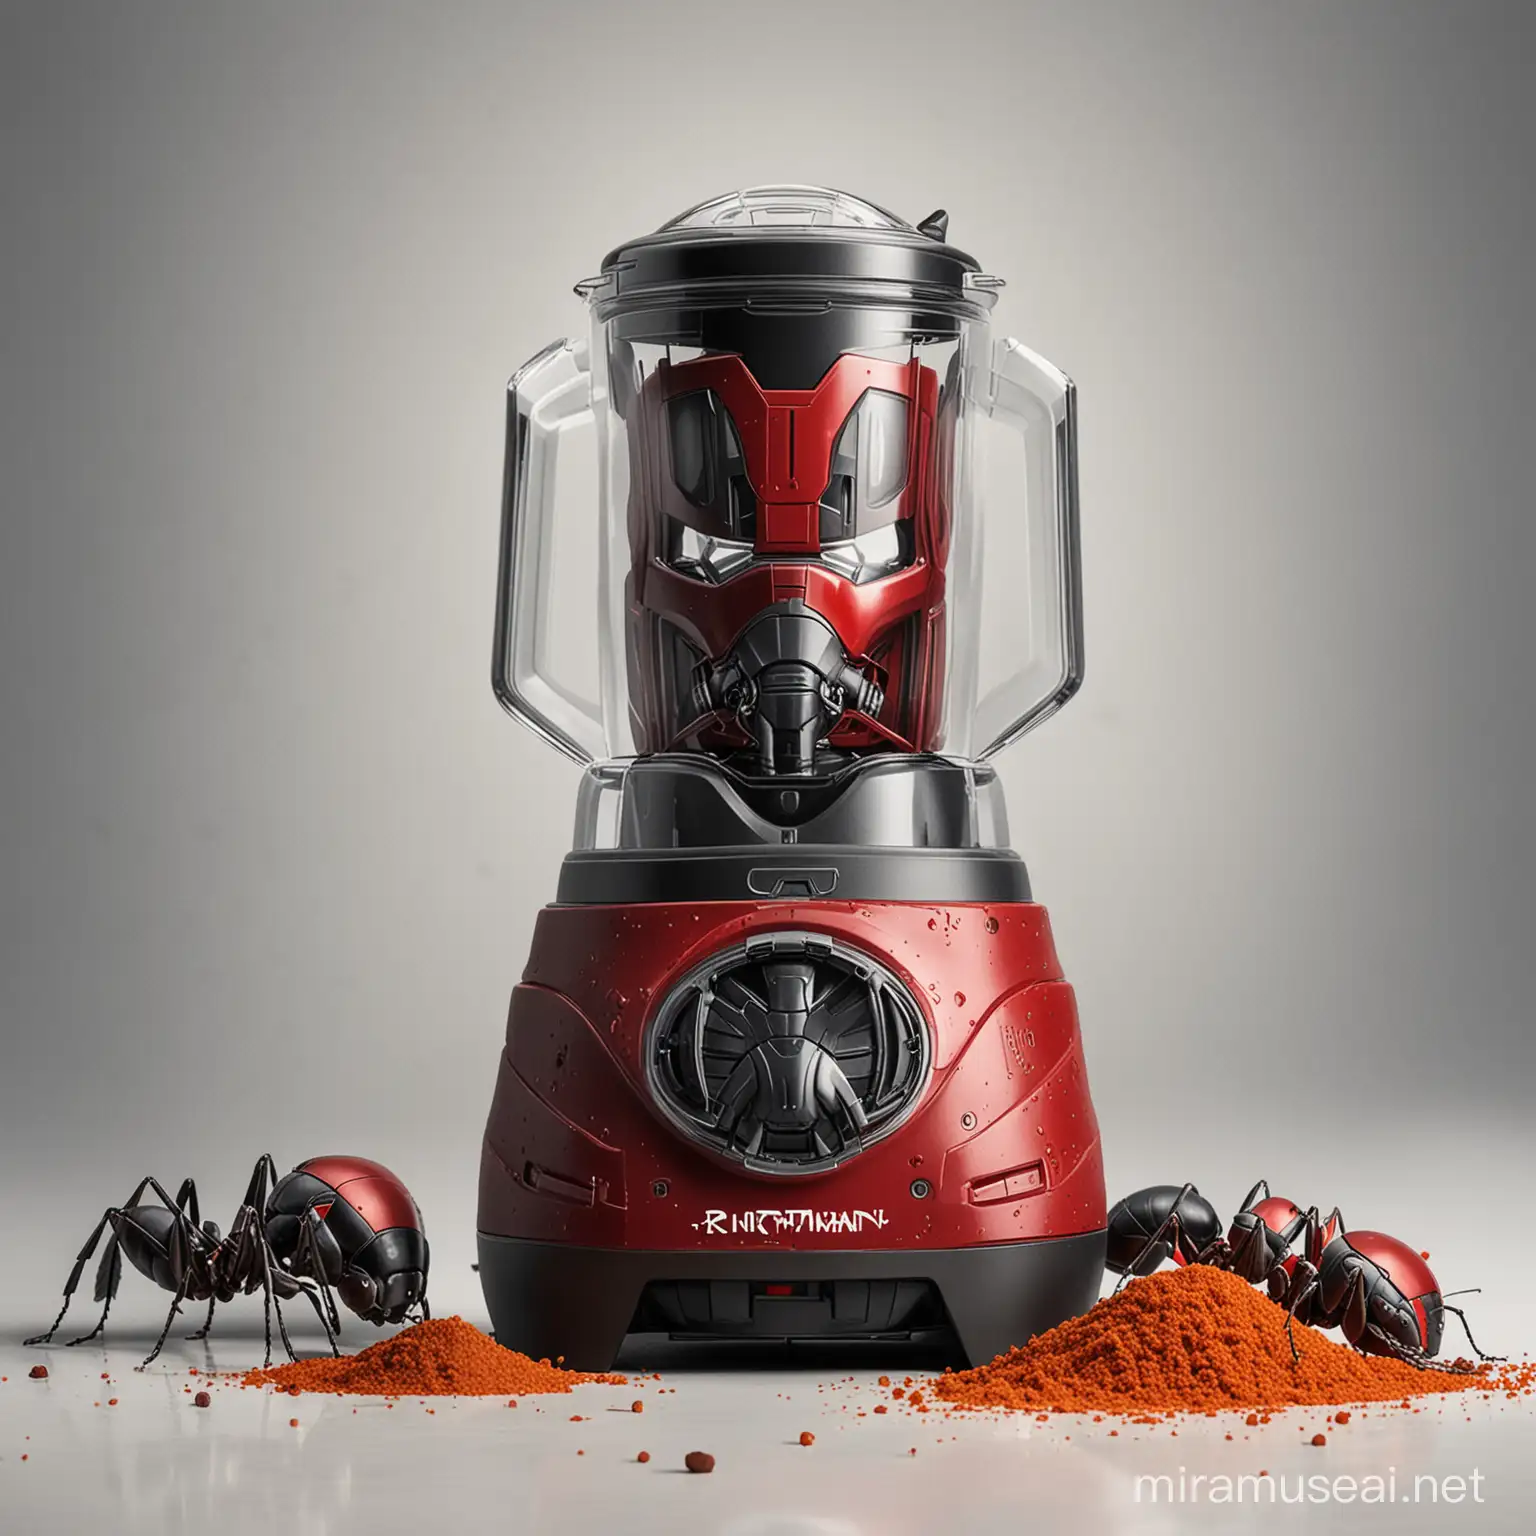 AntMan Patterned Blender Machine Marvel Superhero Themed Appliance for Kitchen Enthusiasts